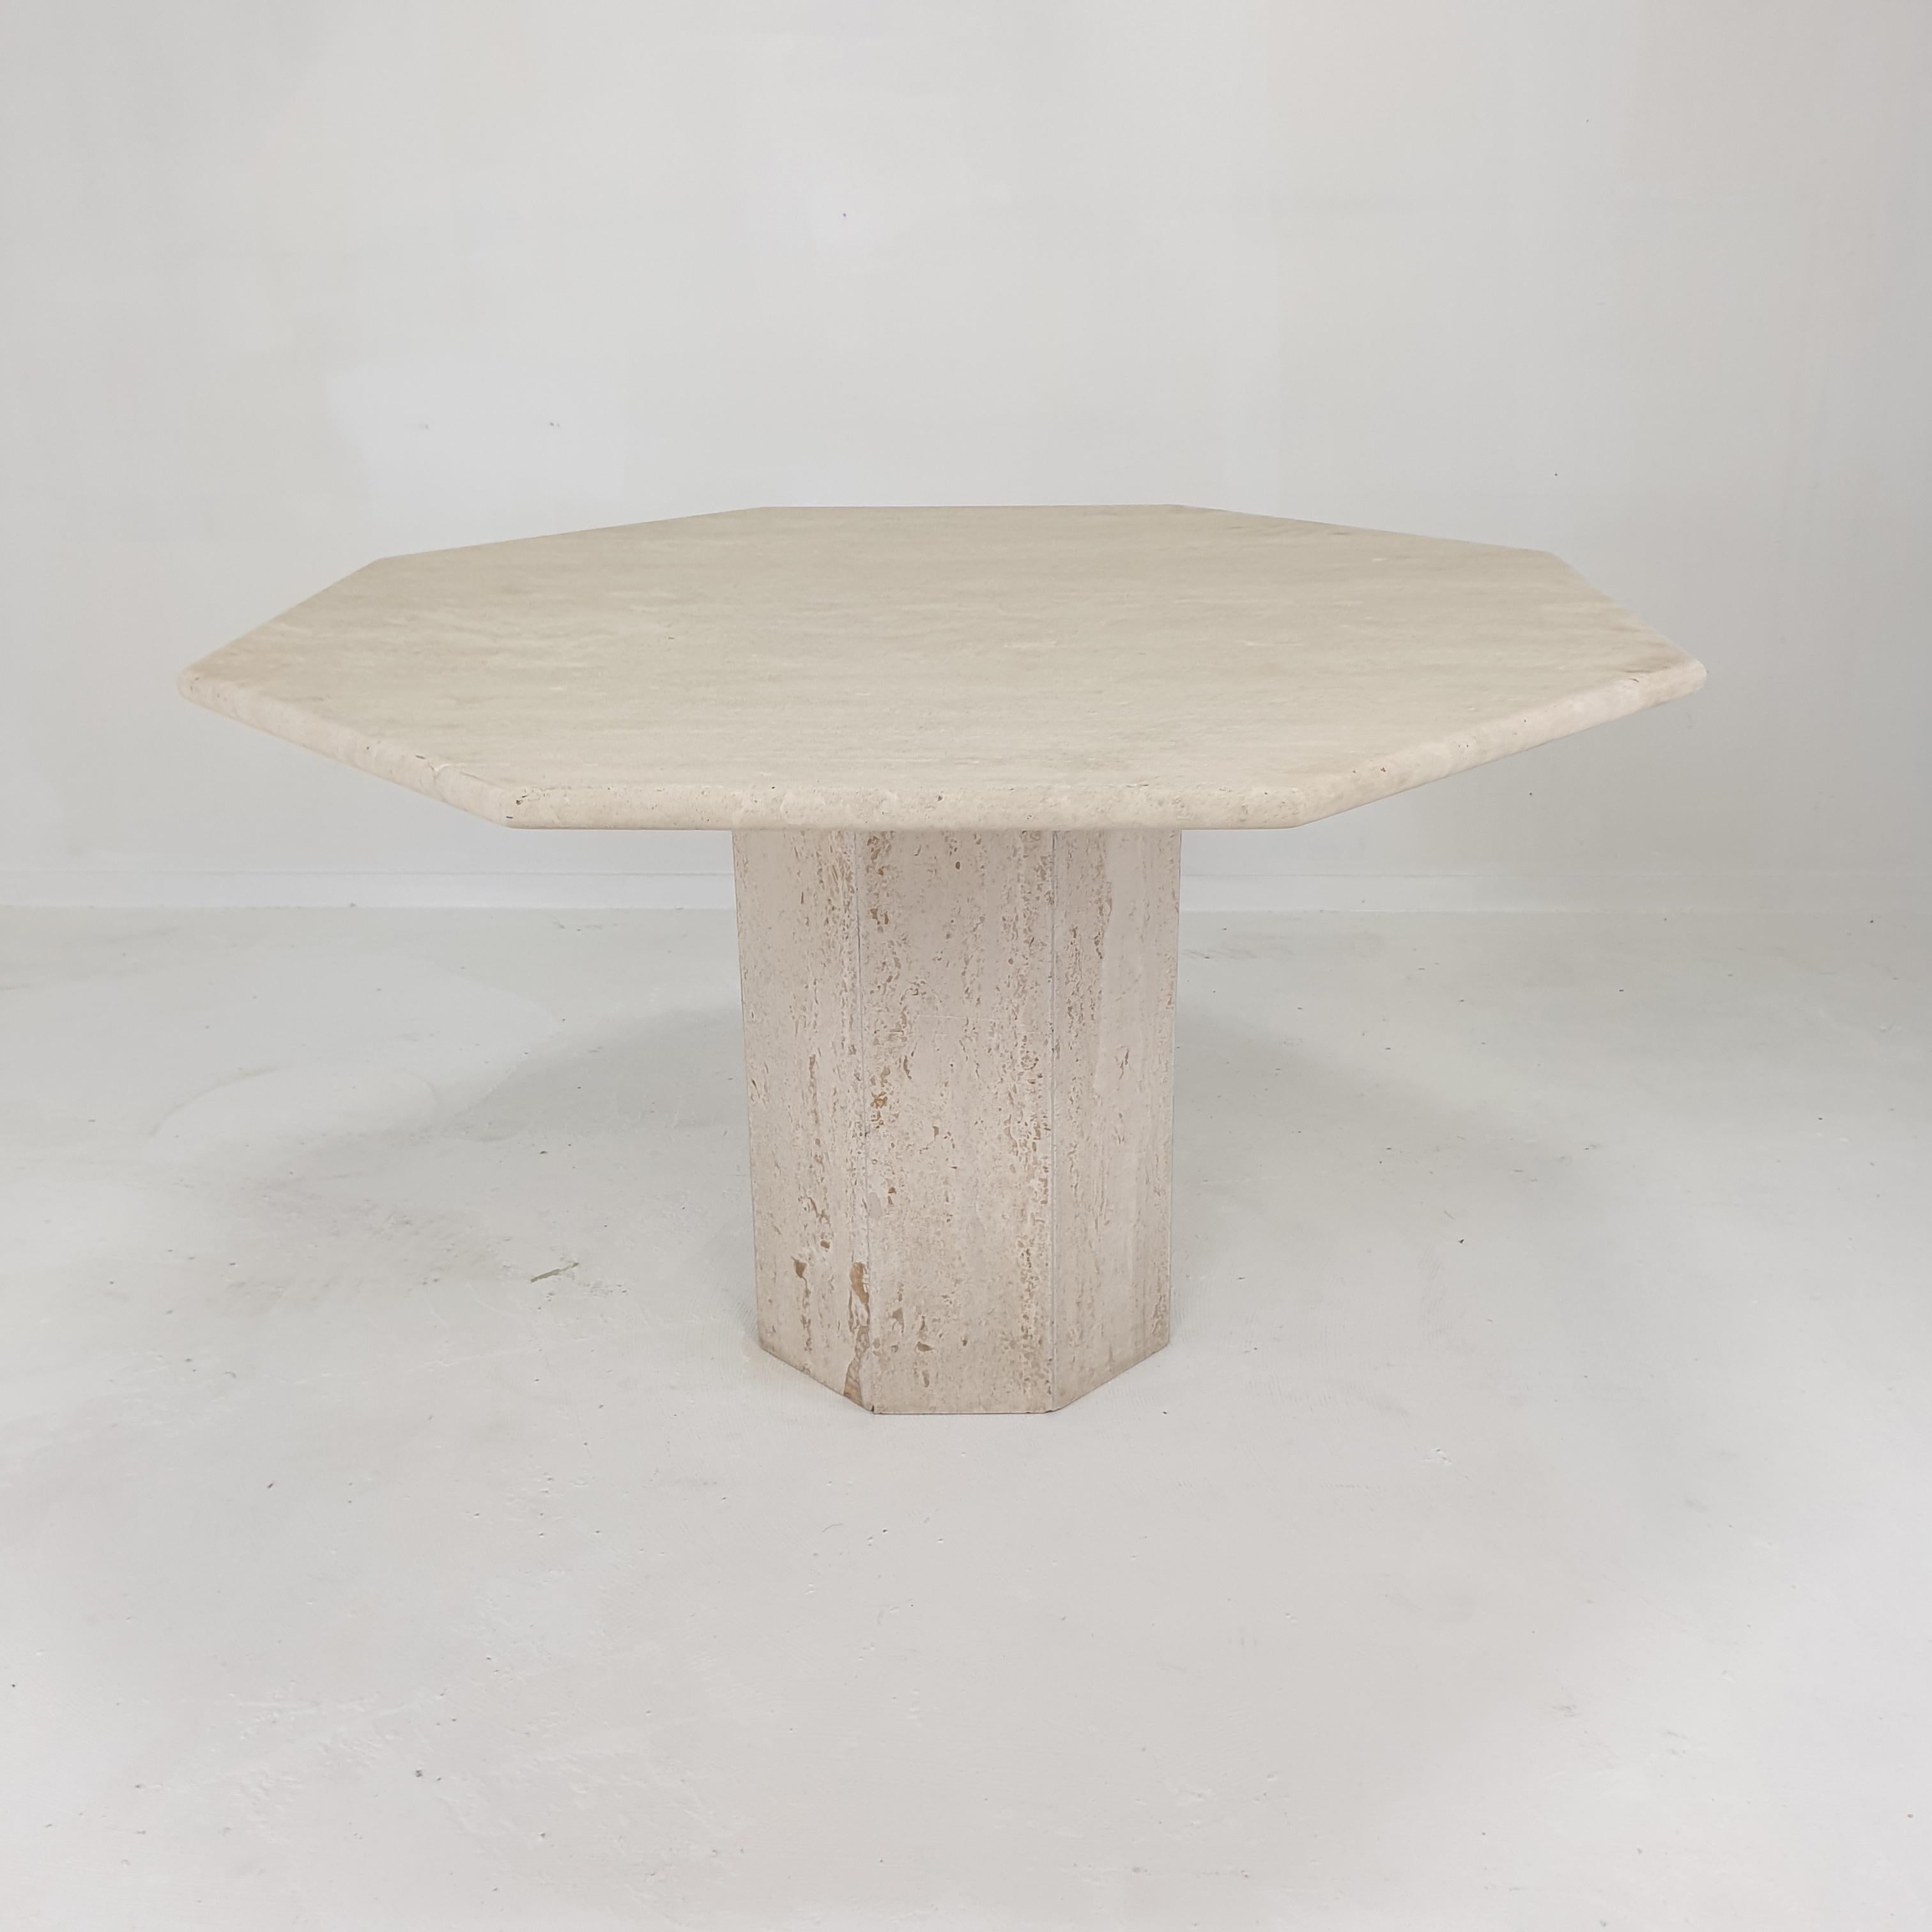 Very nice Italian dining table, it can also be used outside.
The table is made in the 70's.

It is handcrafted out of very nice travertine. 
The plate has a very beautiful rough and worn surface, it has originally been used outside.

Please take